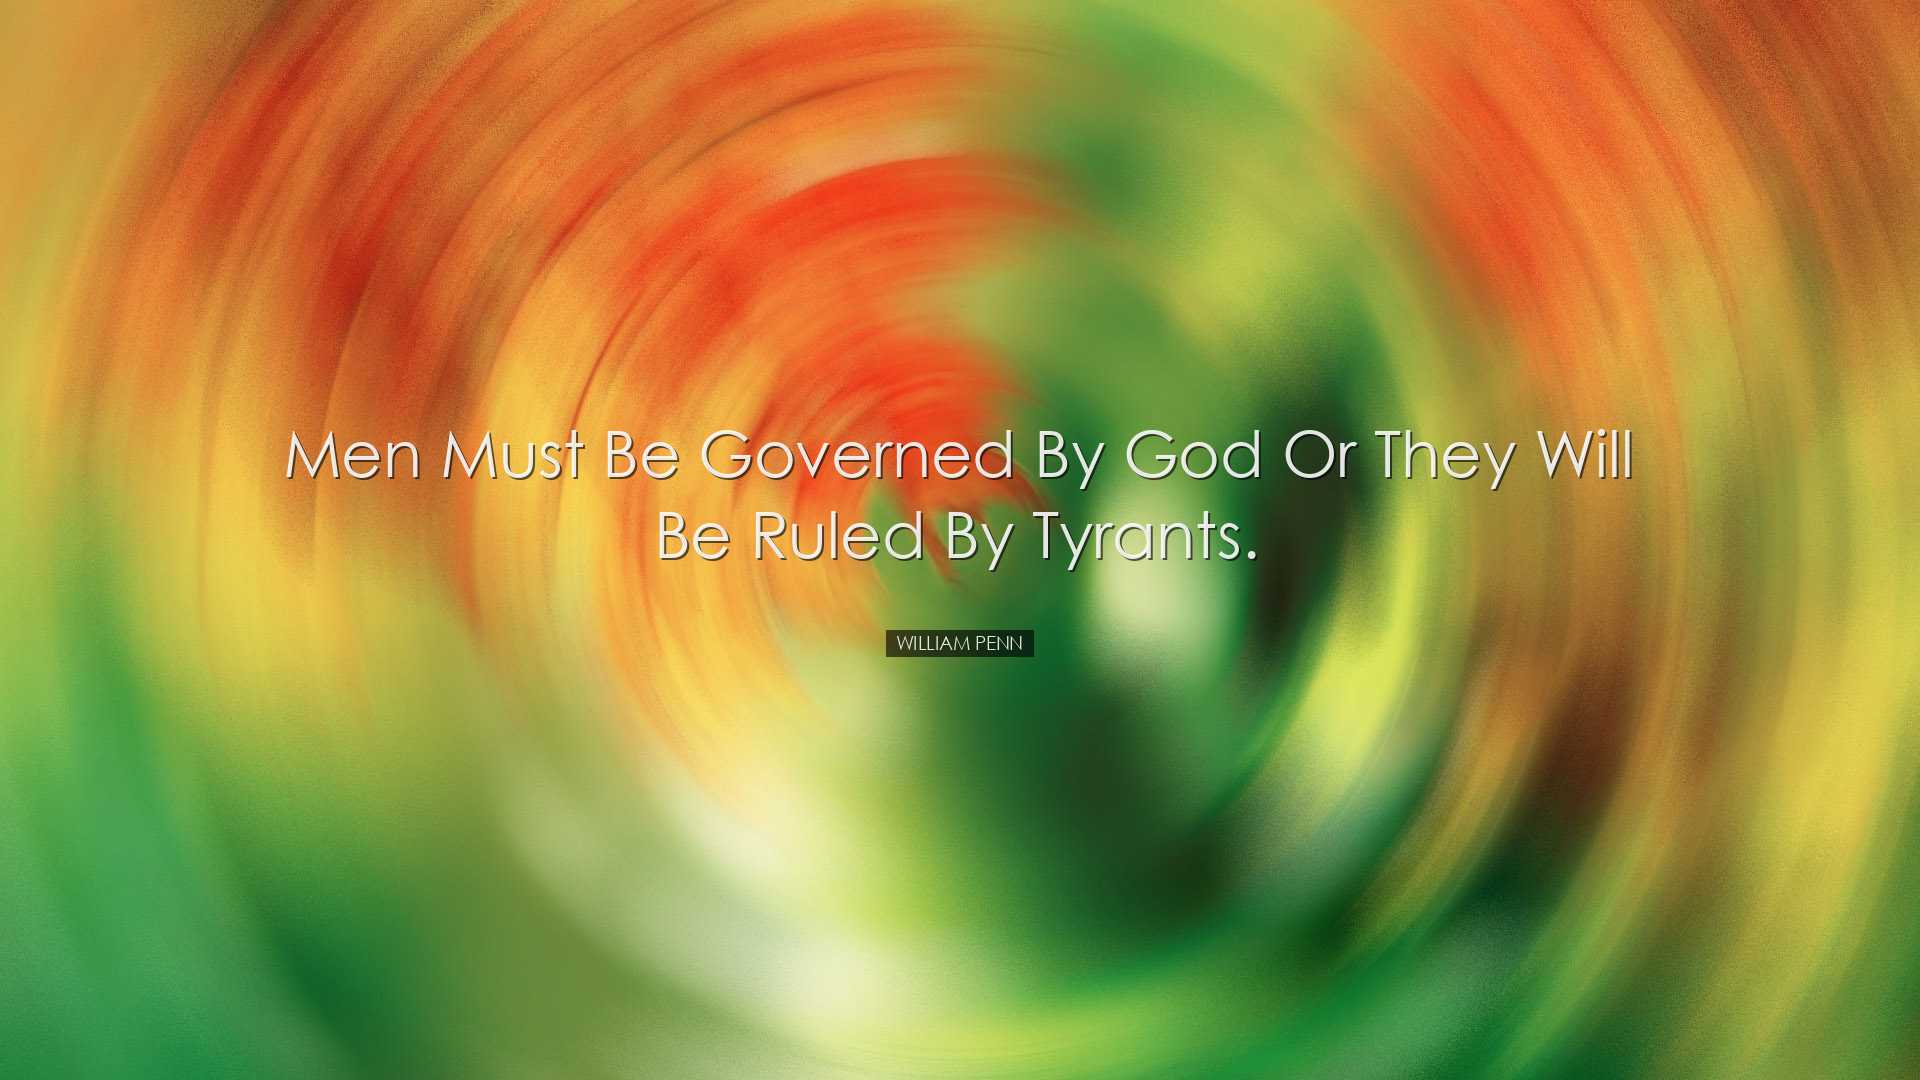 Men must be governed by God or they will be ruled by tyrants. - Wi